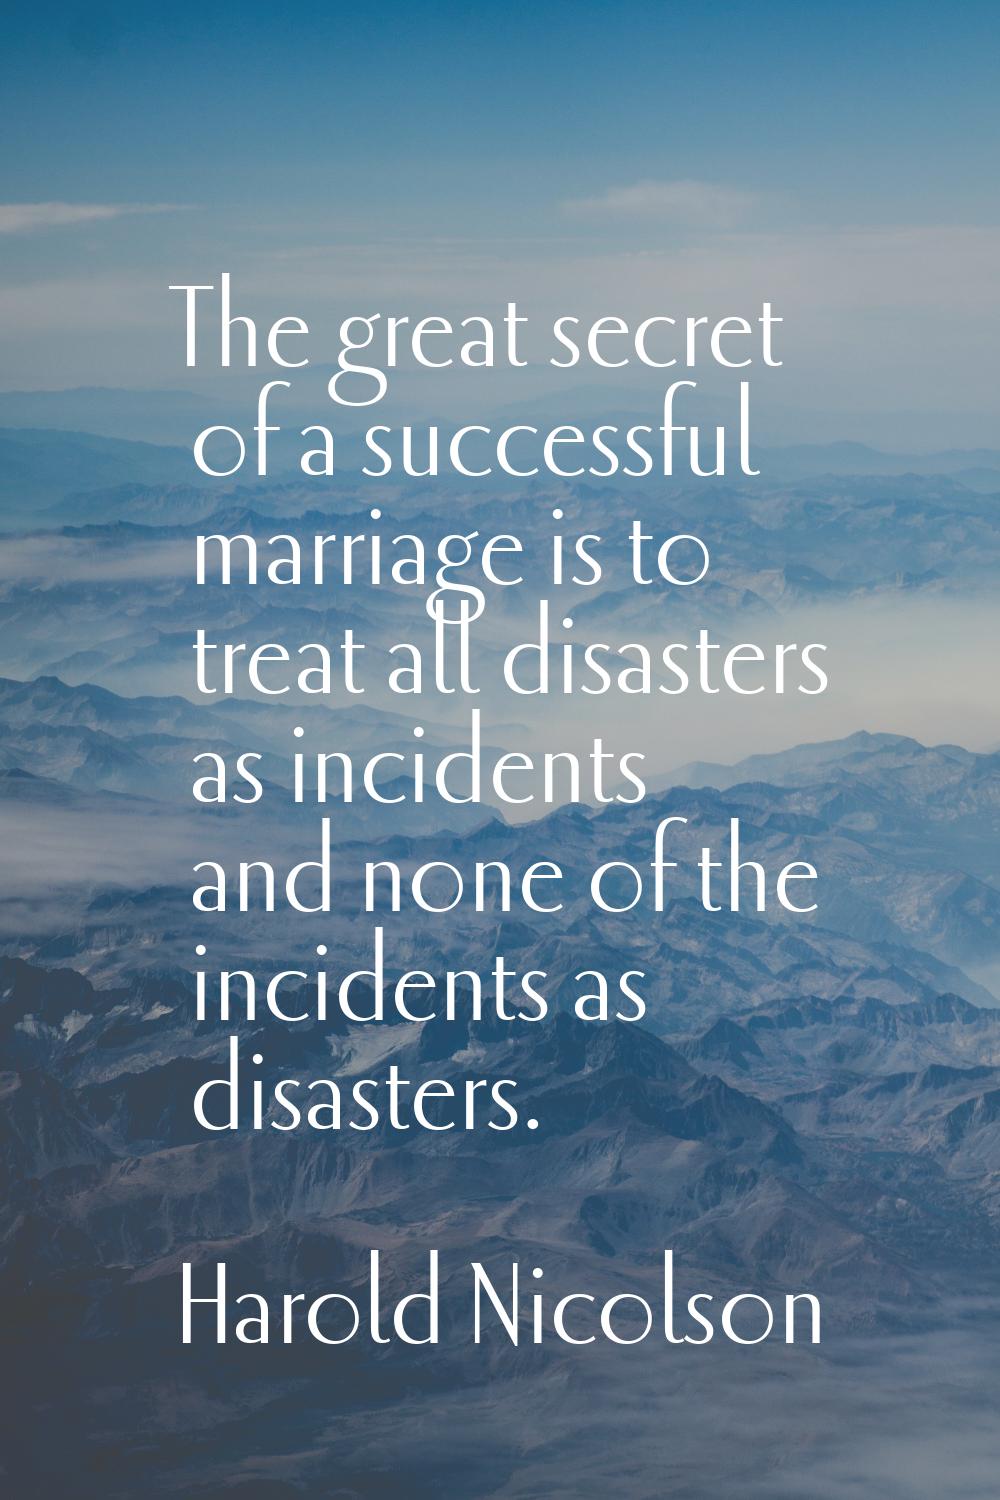 The great secret of a successful marriage is to treat all disasters as incidents and none of the in